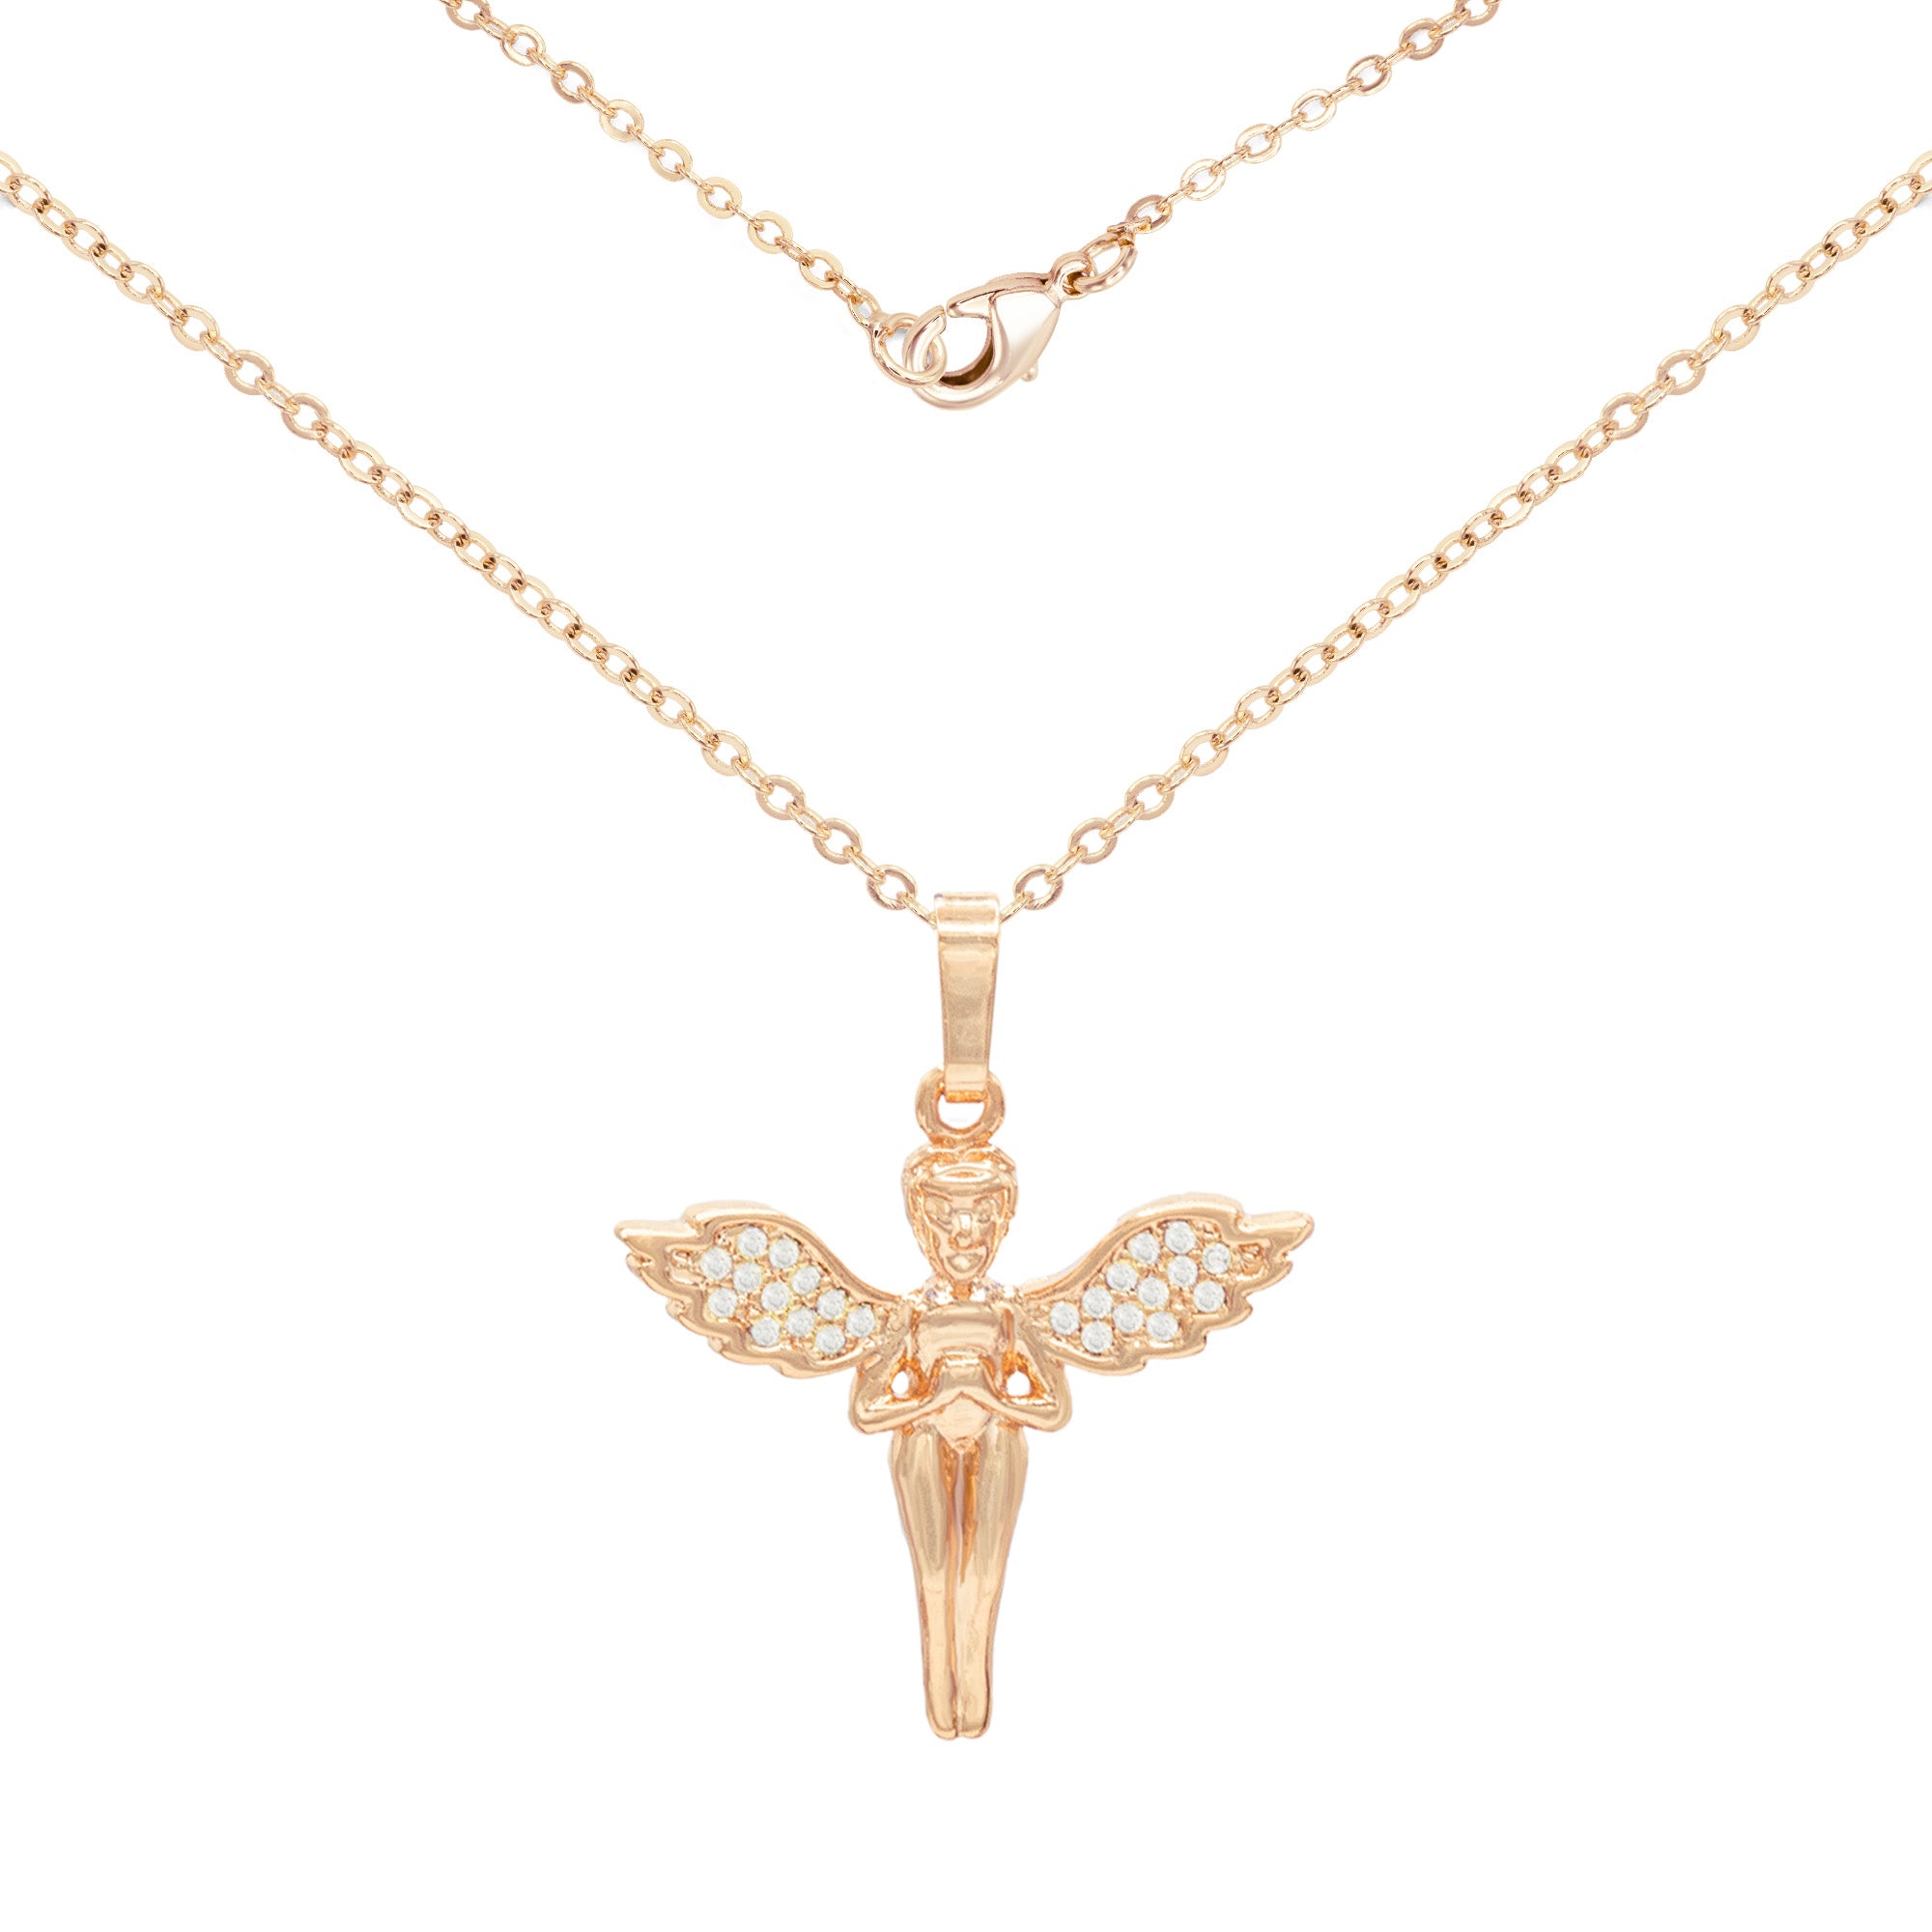 Angel Pendant Cubic Zirconia 18K Gold Filled Rolo Chain Necklace Set CZ Charm Fashion Jewelry Gift Women Men 2.2 mm 18”